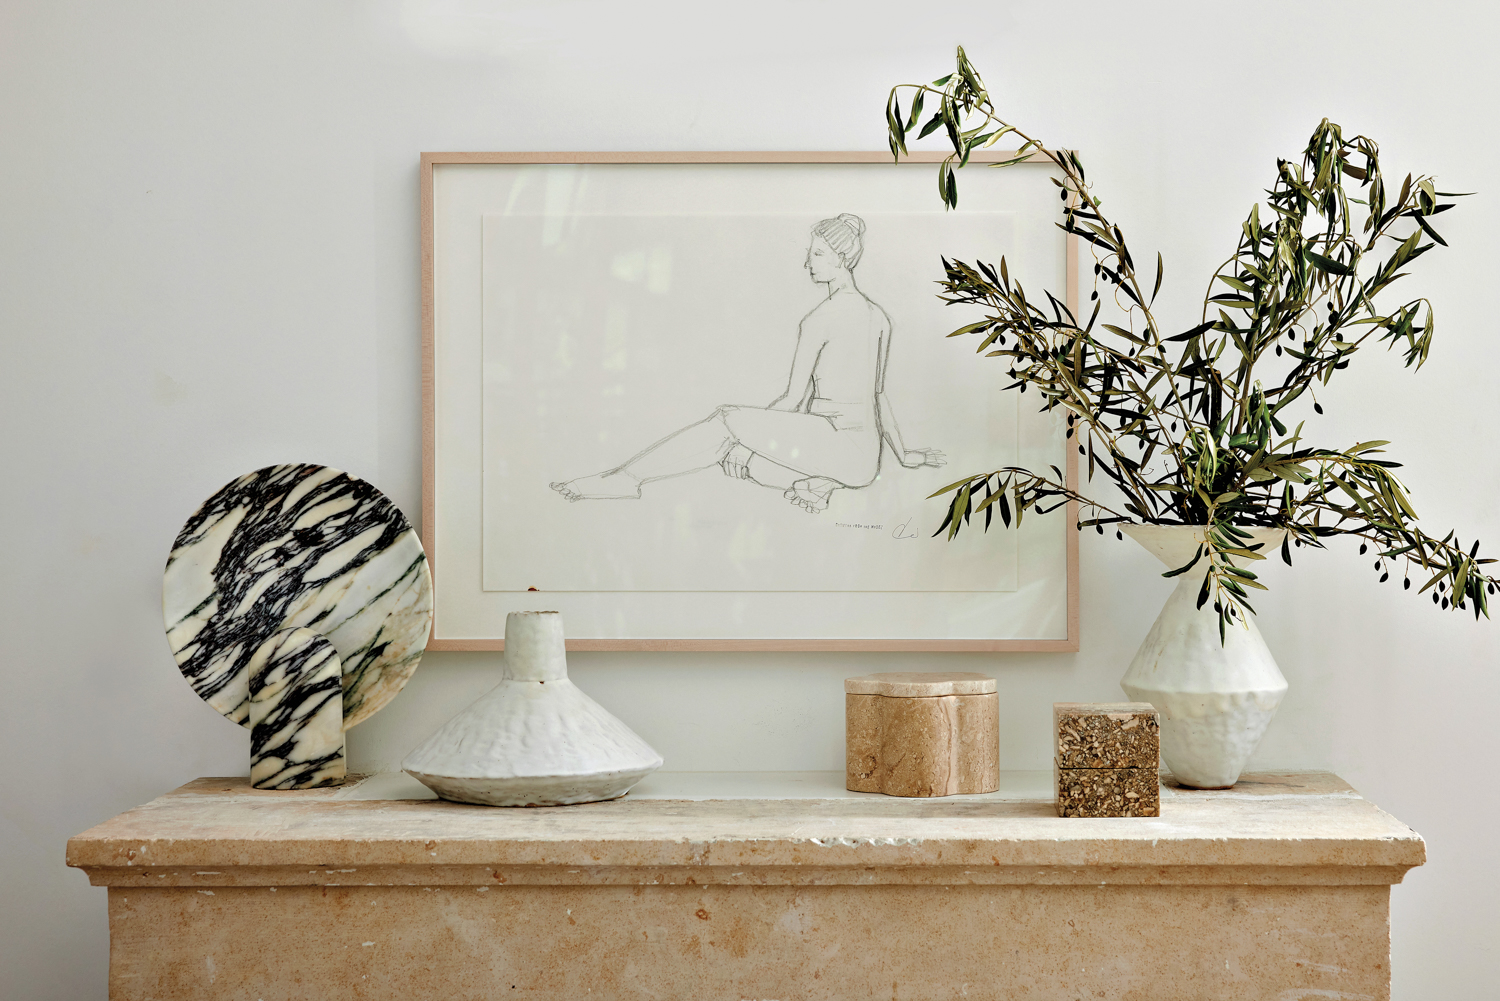 Figure drawing hanging above a stone console featuring vases and decorative pieces